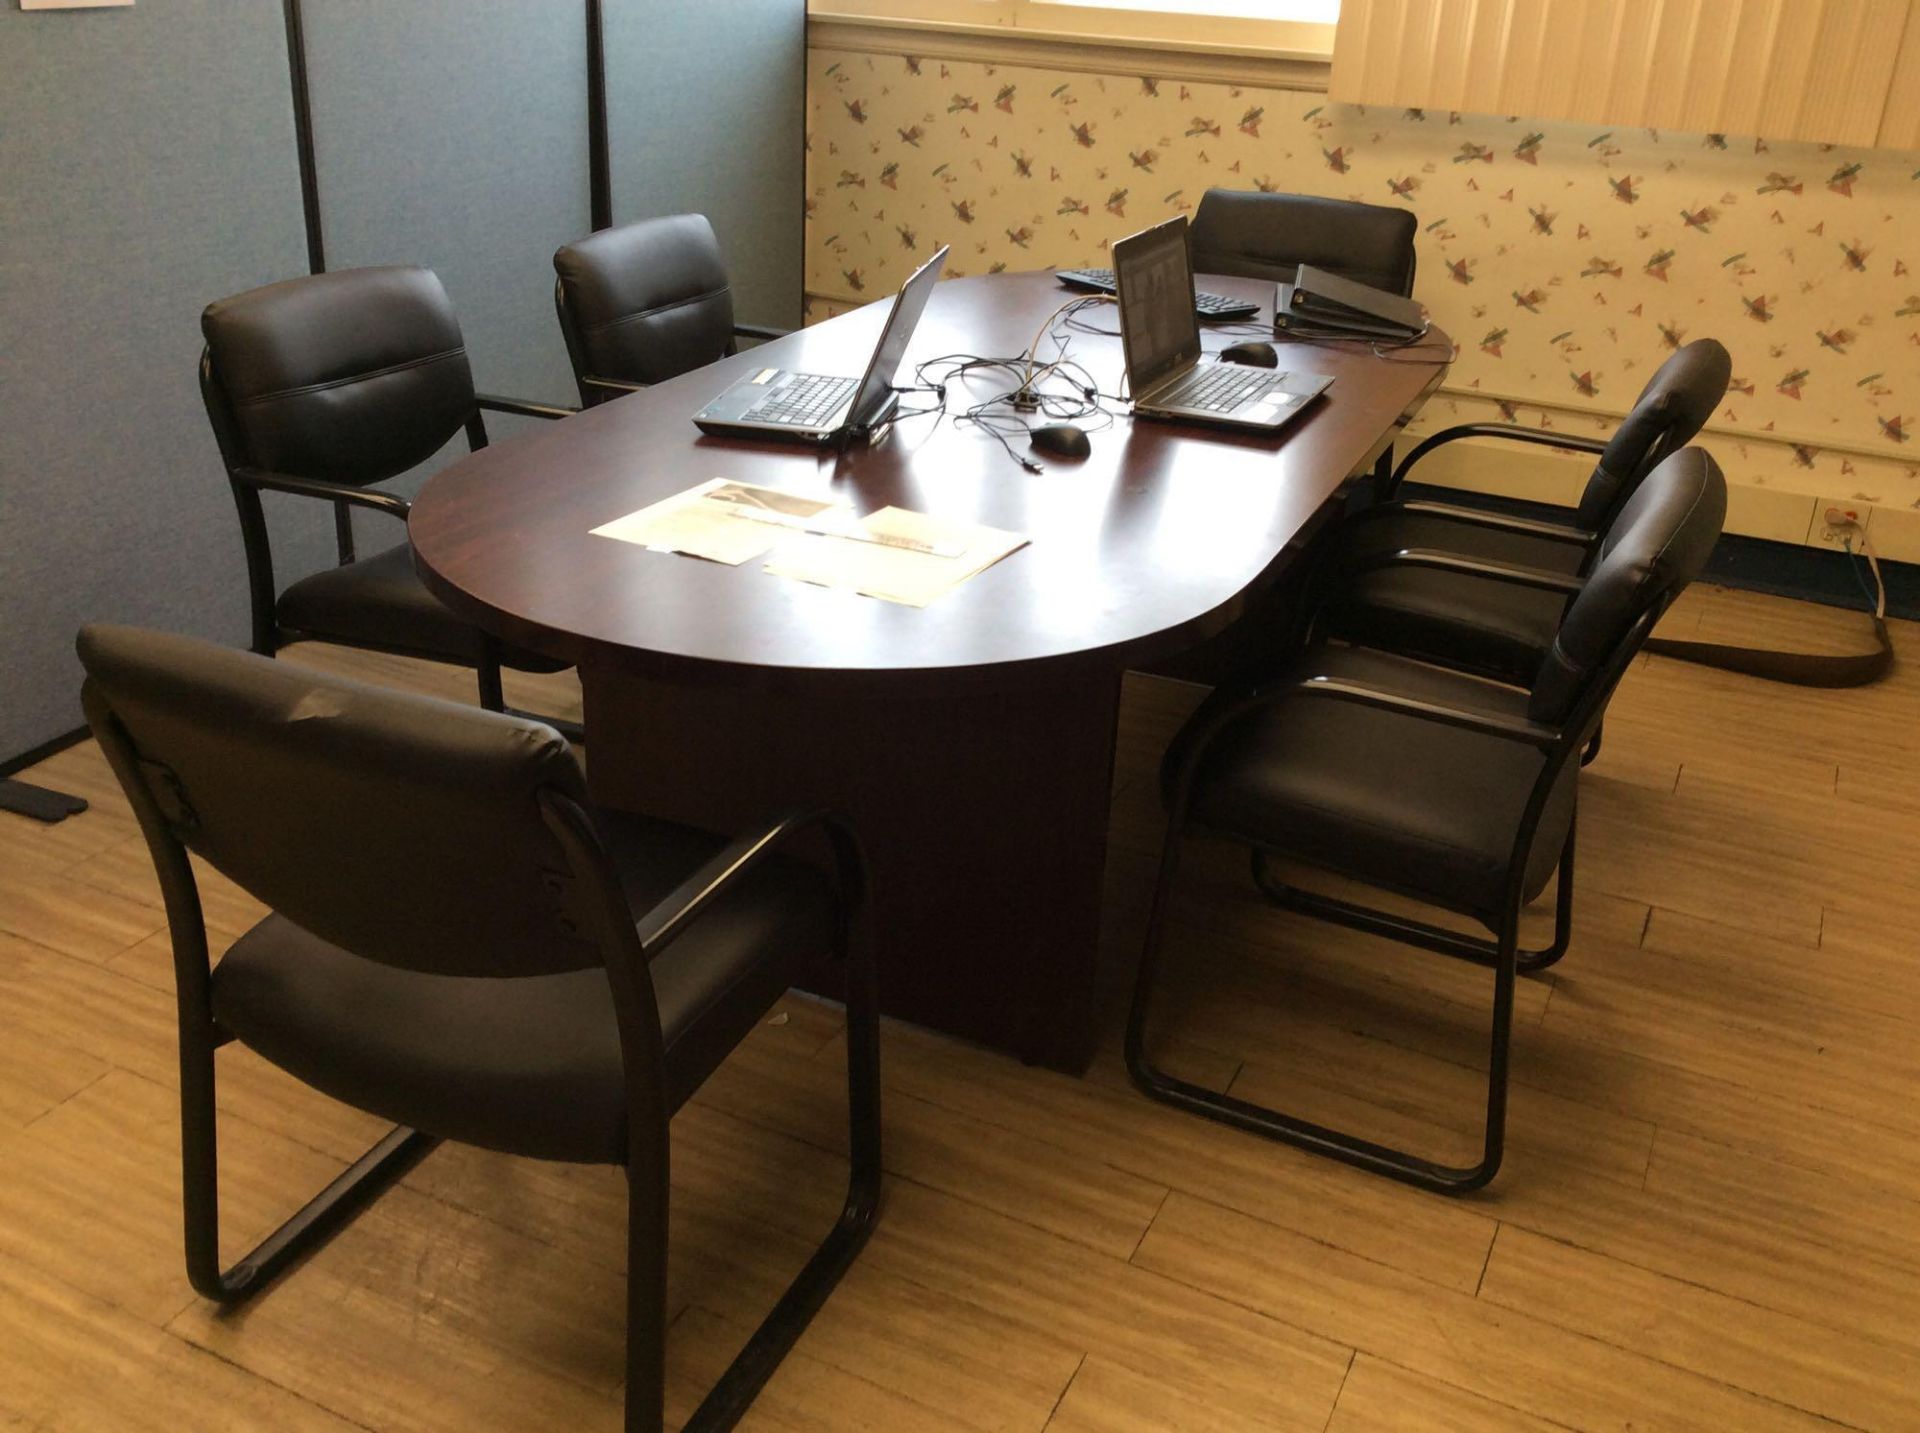 Lot asst office furniture including 8' oval conference table with (6) leather arm chairs, (2) 6' woo